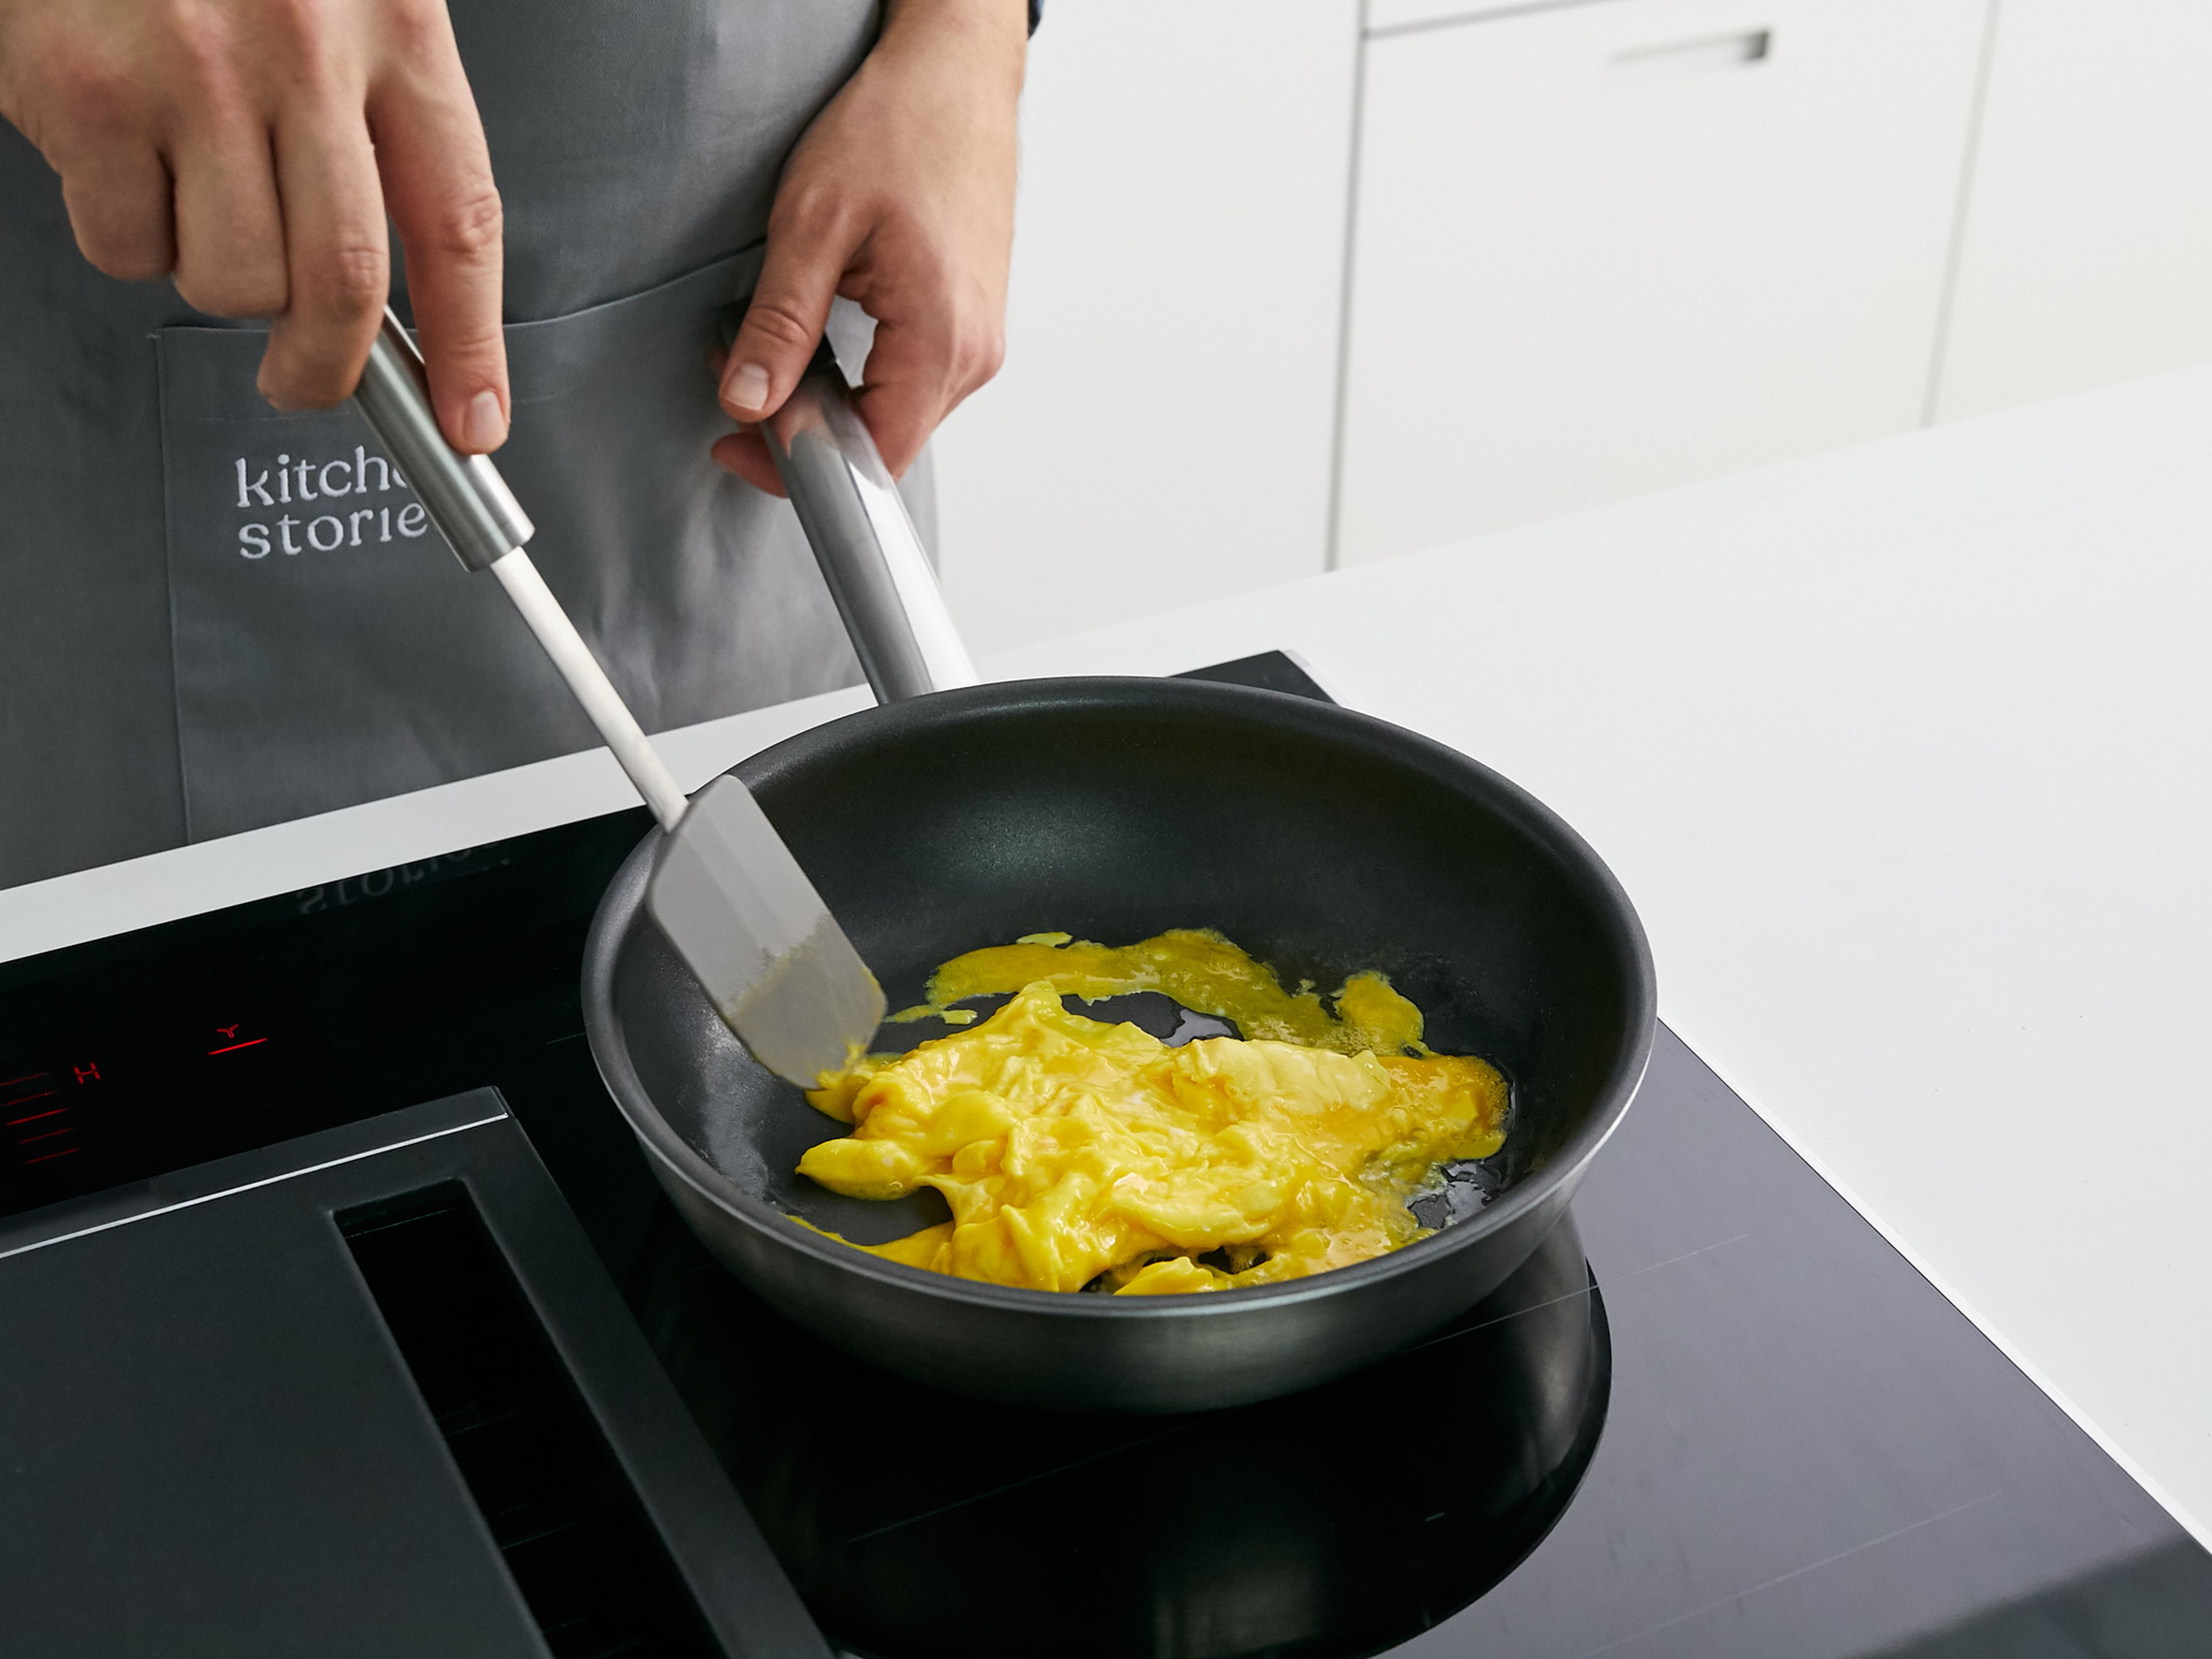 To make scrambled eggs, crack eggs into a bowl and season with salt. Whisk to combine. Add butter to a nonstick pan over low heat. When the butter has melted, add eggs and let set briefly. Use a rubber spatula to push liquid eggs to the middle. Repeat until egg becomes creamy but not dry. Enjoy!